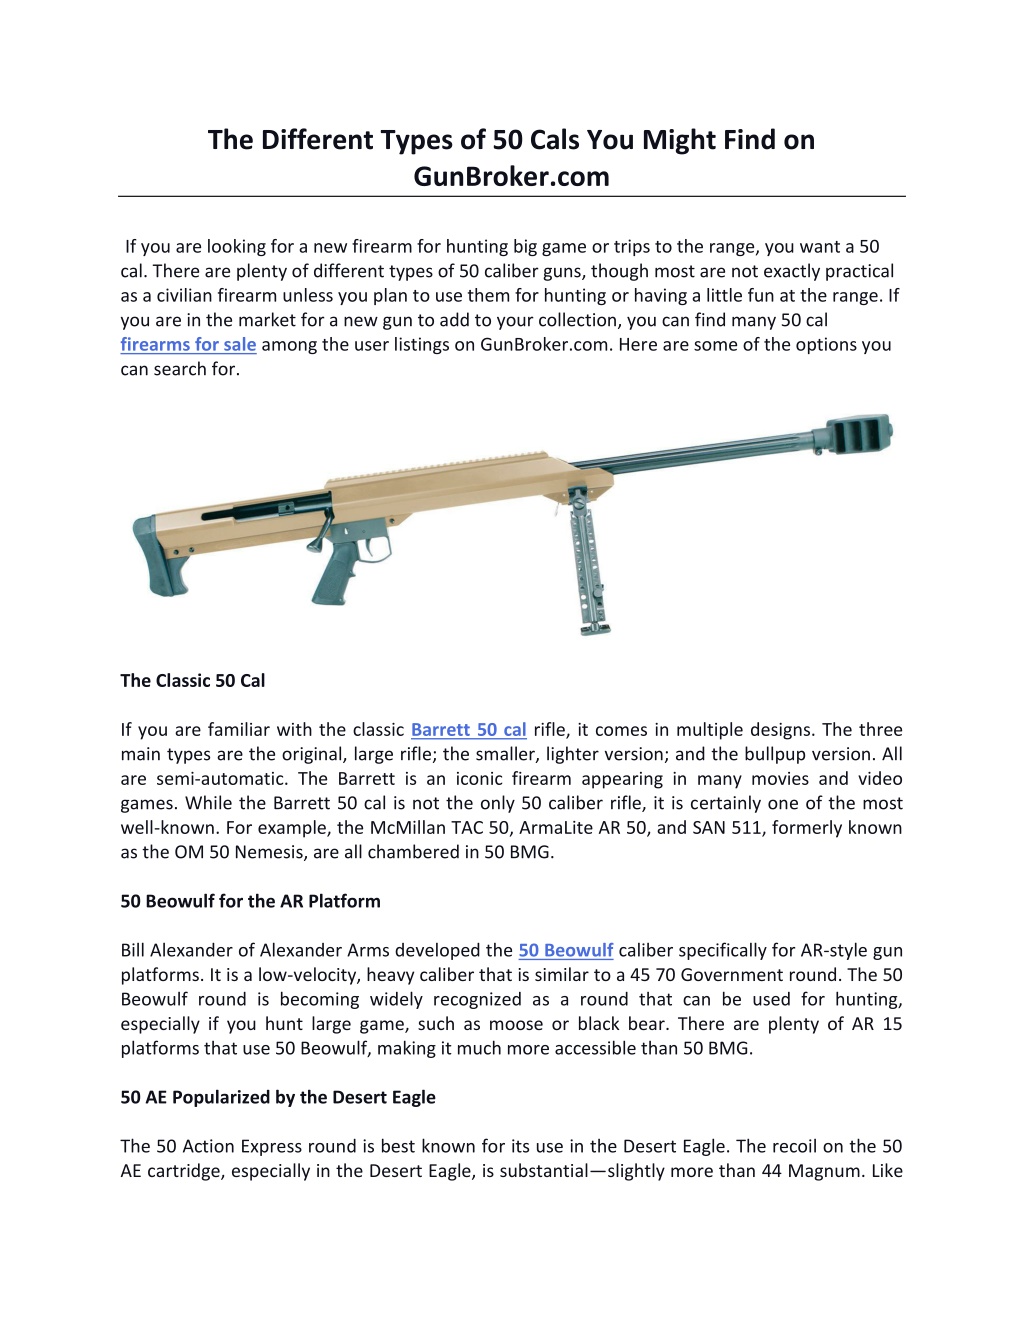 PPT - The Different Types of 50 Cals You Might Find on GunBroker.com ...